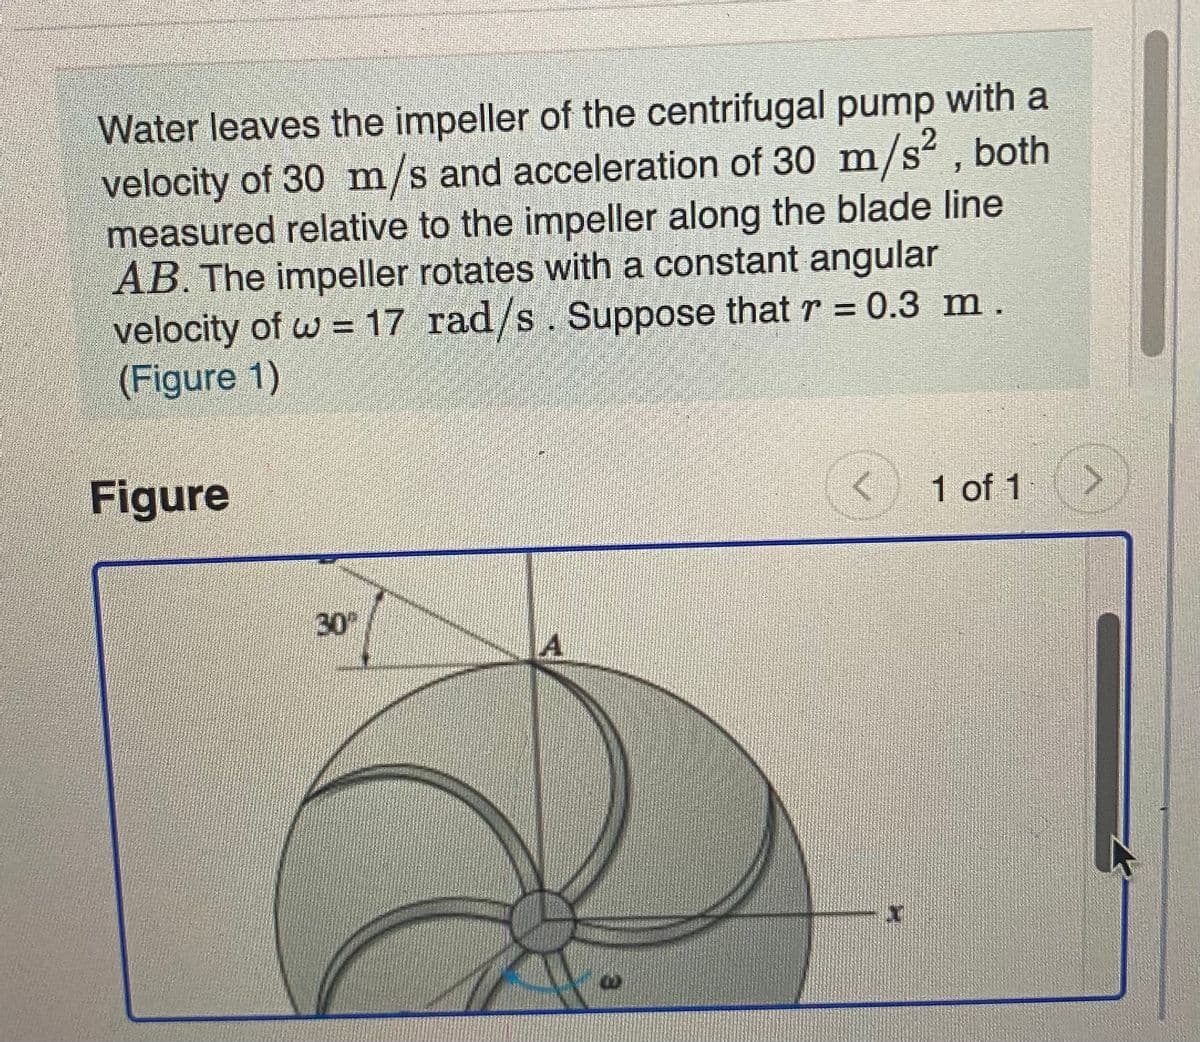 Water leaves the impeller of the centrifugal pump with a
velocity of 30 m/s and acceleration of 30 m/s² , both
measured relative to the impeller along the blade line
AB. The impeller rotates with a constant angular
velocity of w = 17 rad/s. Suppose that r = 0.3 m.
(Figure 1)
S.
Figure
< 1 of 1
30%
A.
